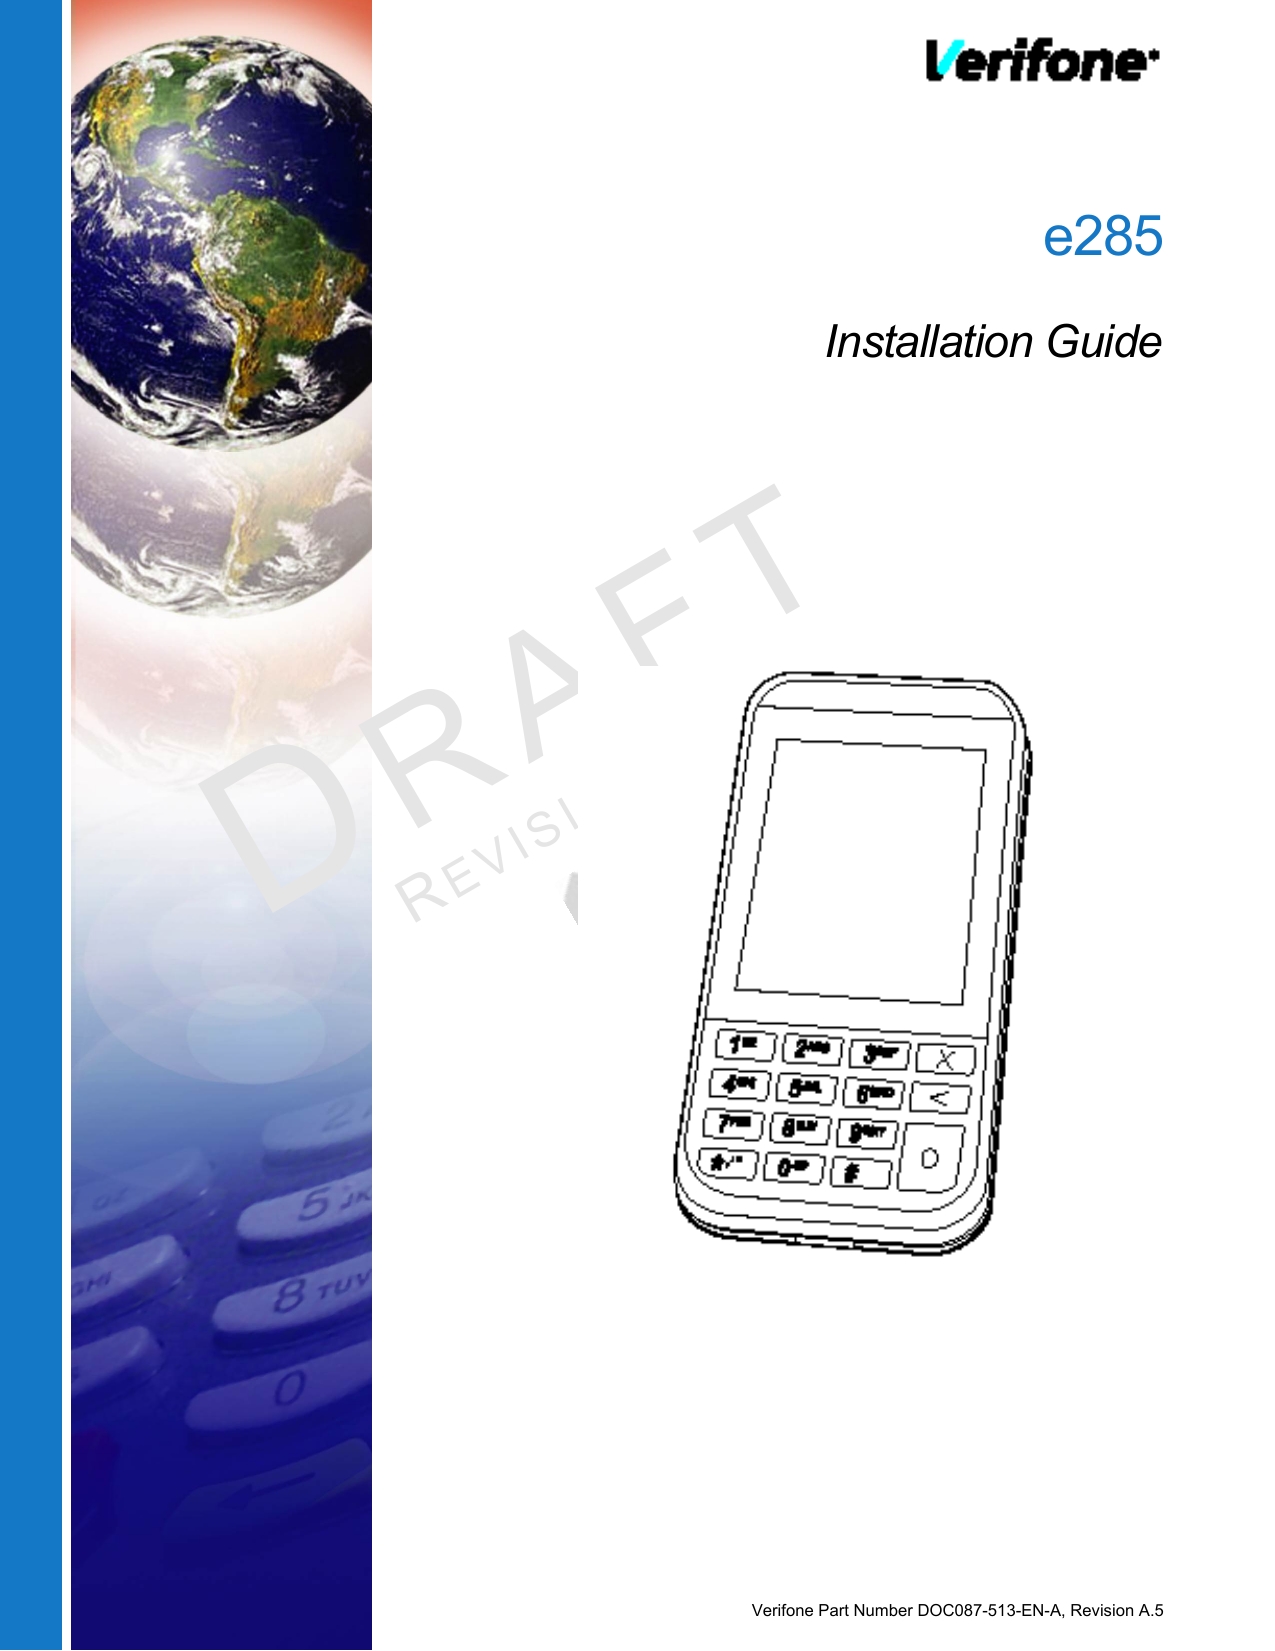 Verifone Part Number DOC087-513-EN-A, Revision A.5DRAFTREVISION A.5 e285Installation Guide 